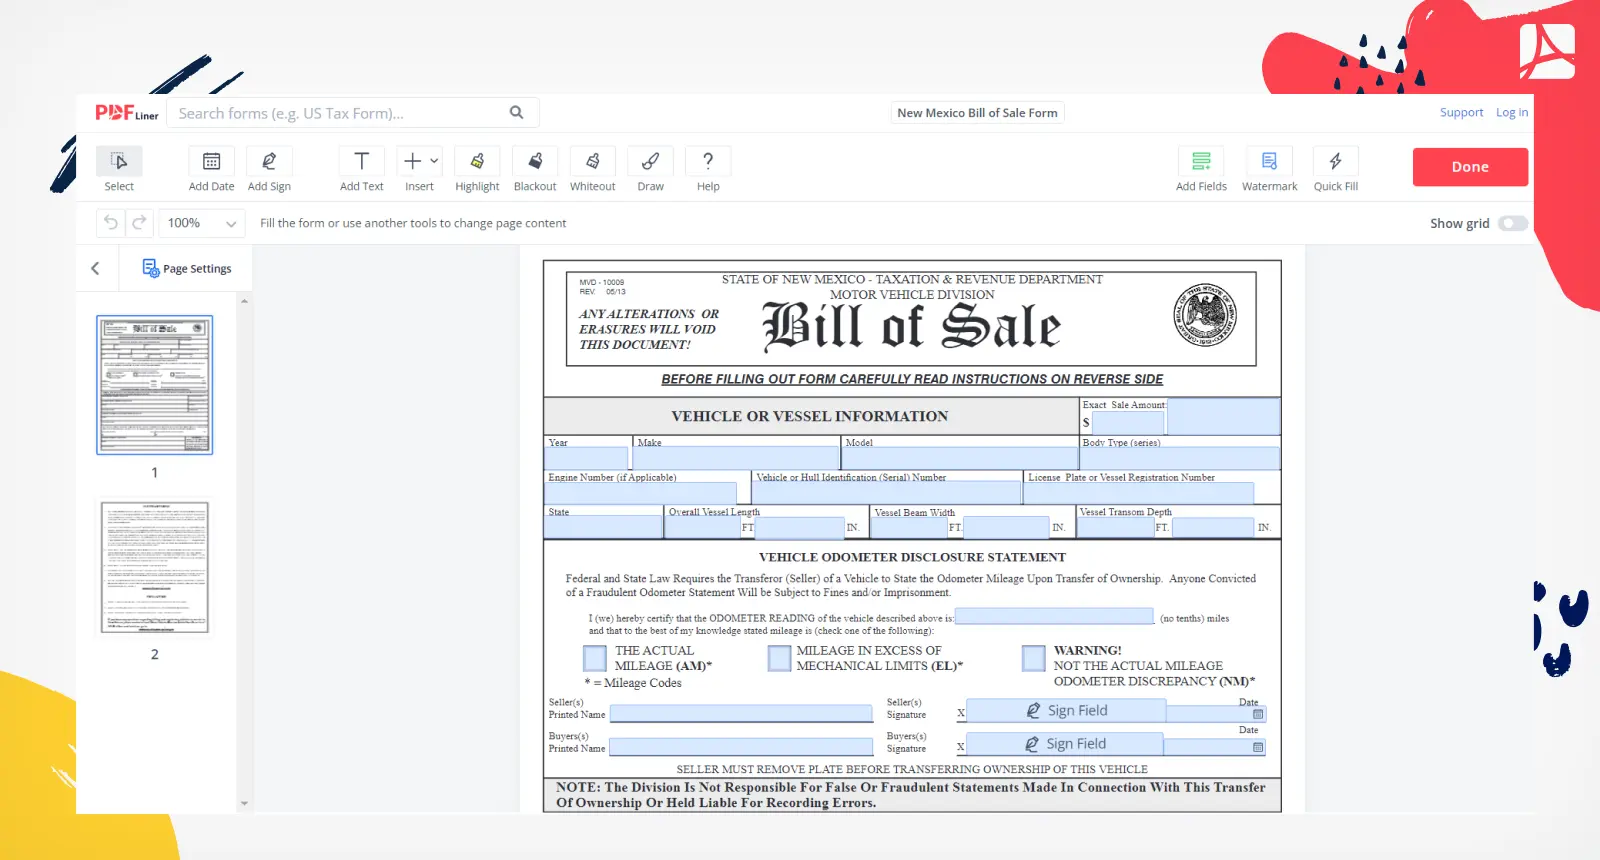 New Mexico Bill of Sale Form Screenshot